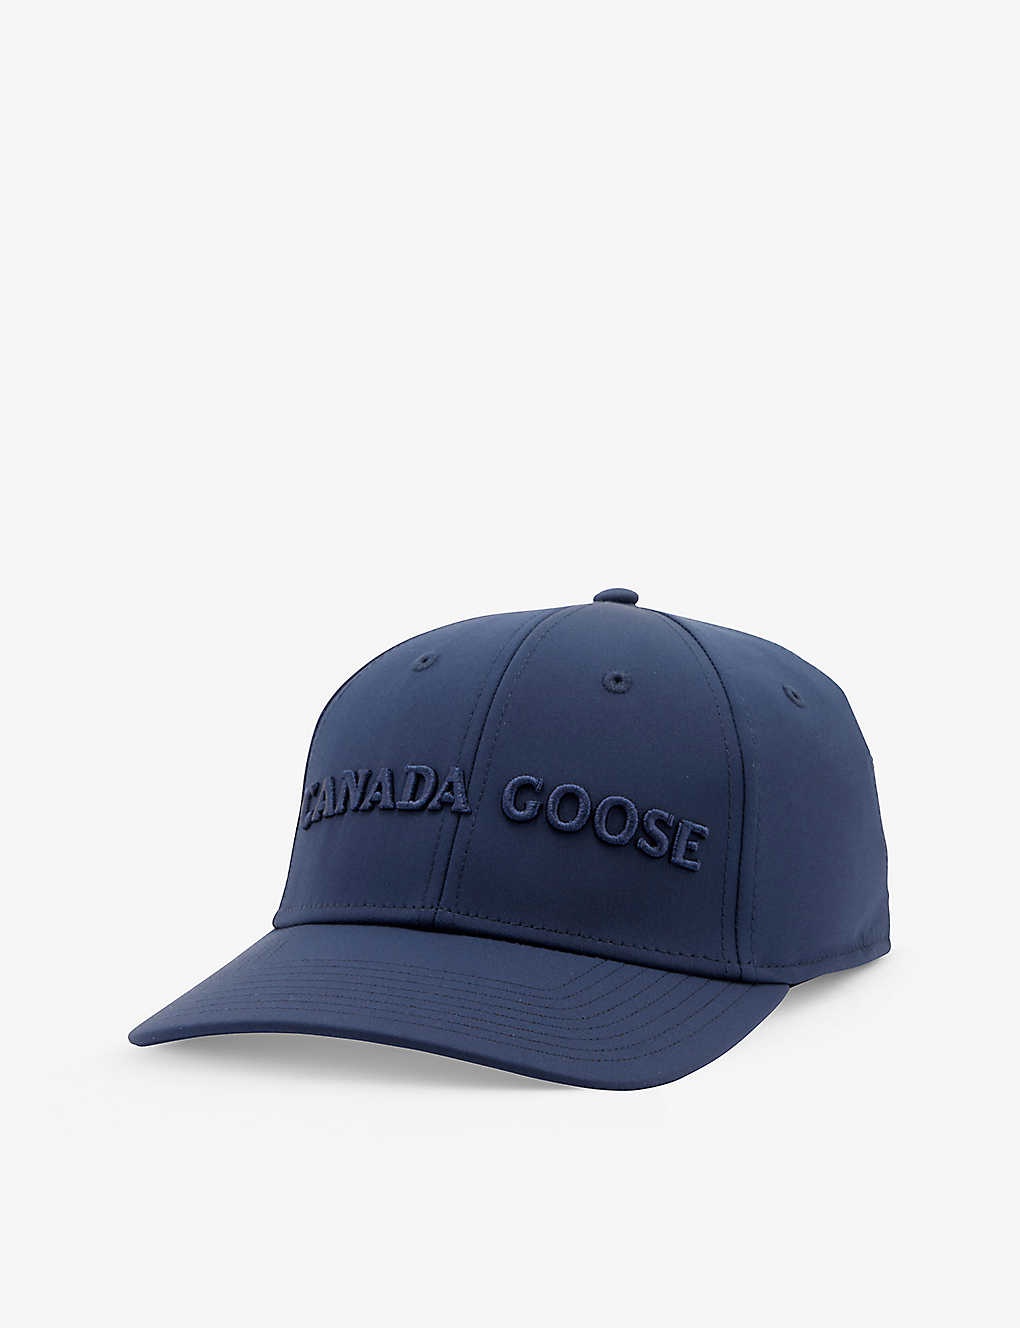 embroidered-logo cap - 1